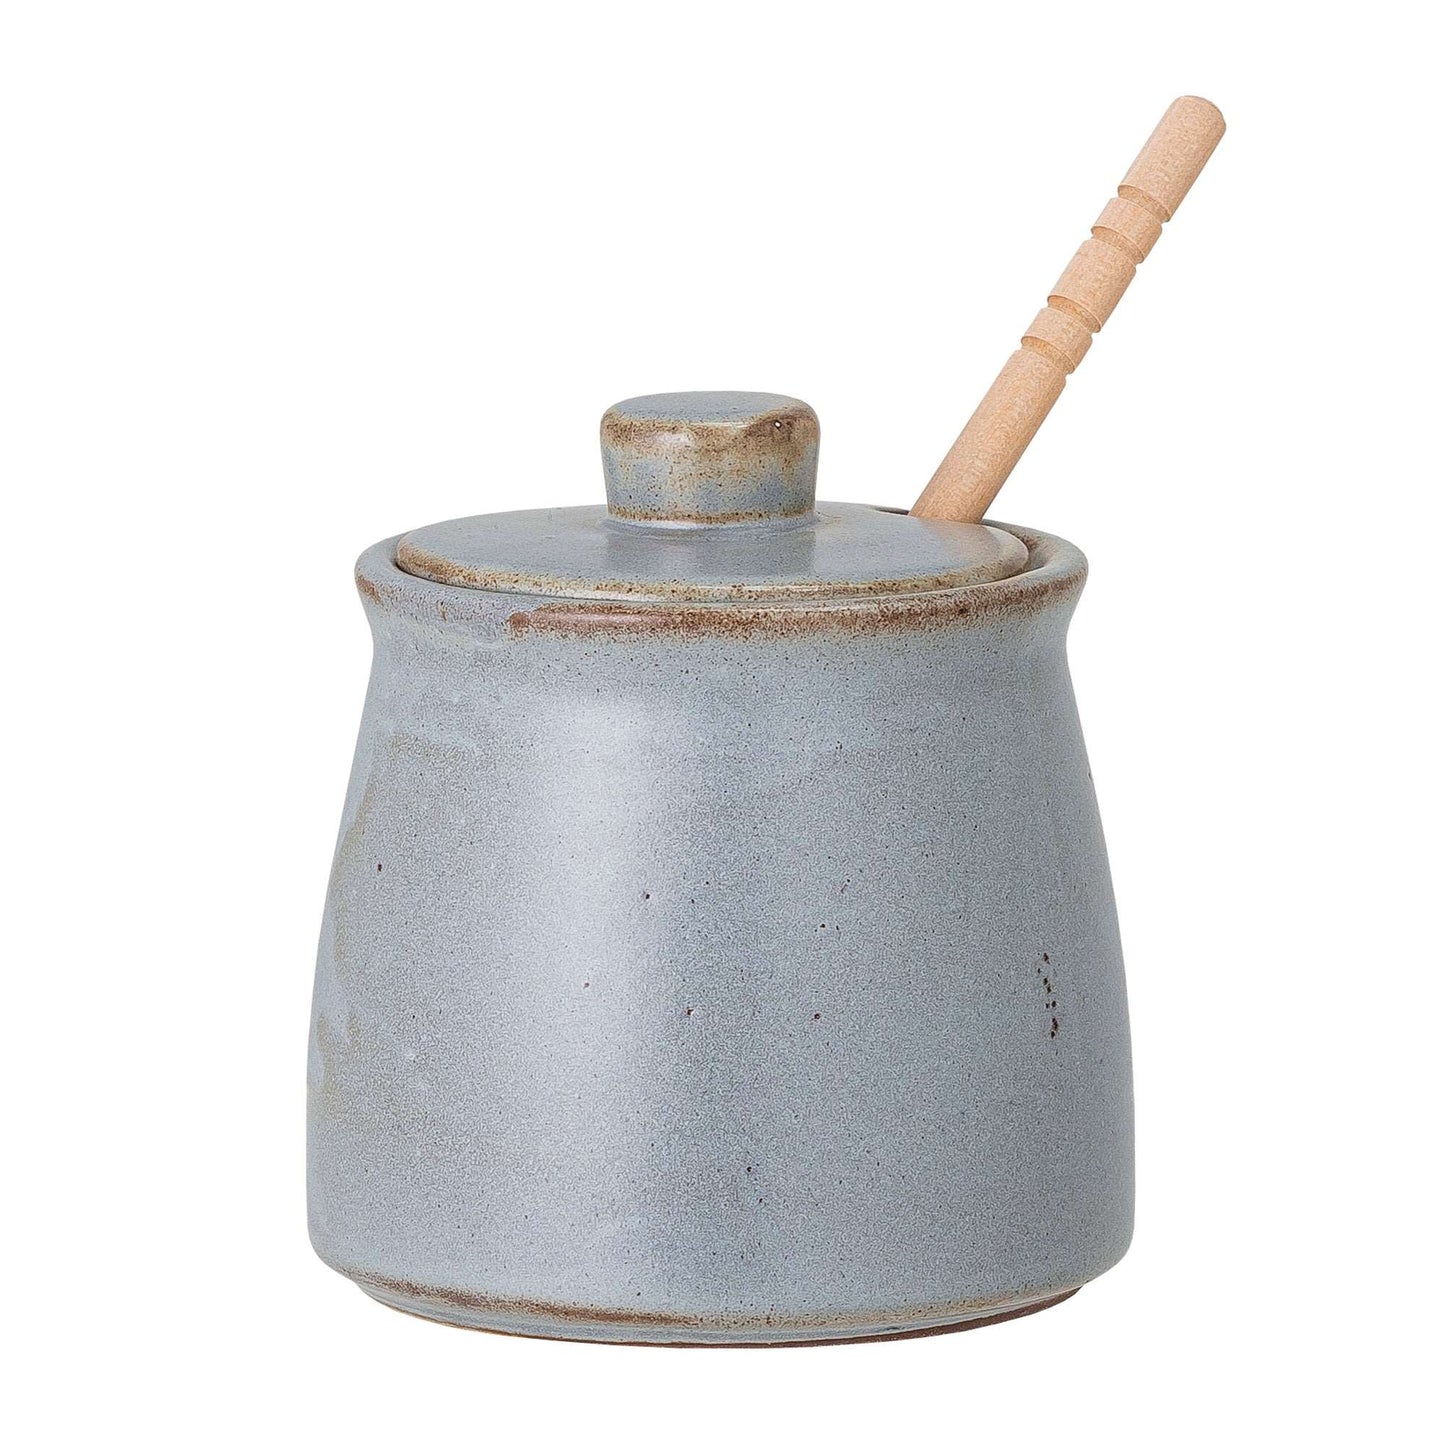 Honey Pot with Birch Dipper  Honey Pot With  Birchwood Dipper by Bloomingville is an oriental inspired honey pot, crafted in blue stoneware and comes with a birch wood dipper. A very practical way of storing stick honey.  Due to the nature of the glaze, color variations may occur.  Capacity: 350ml  D10xH10 cm  Dishwasher safe